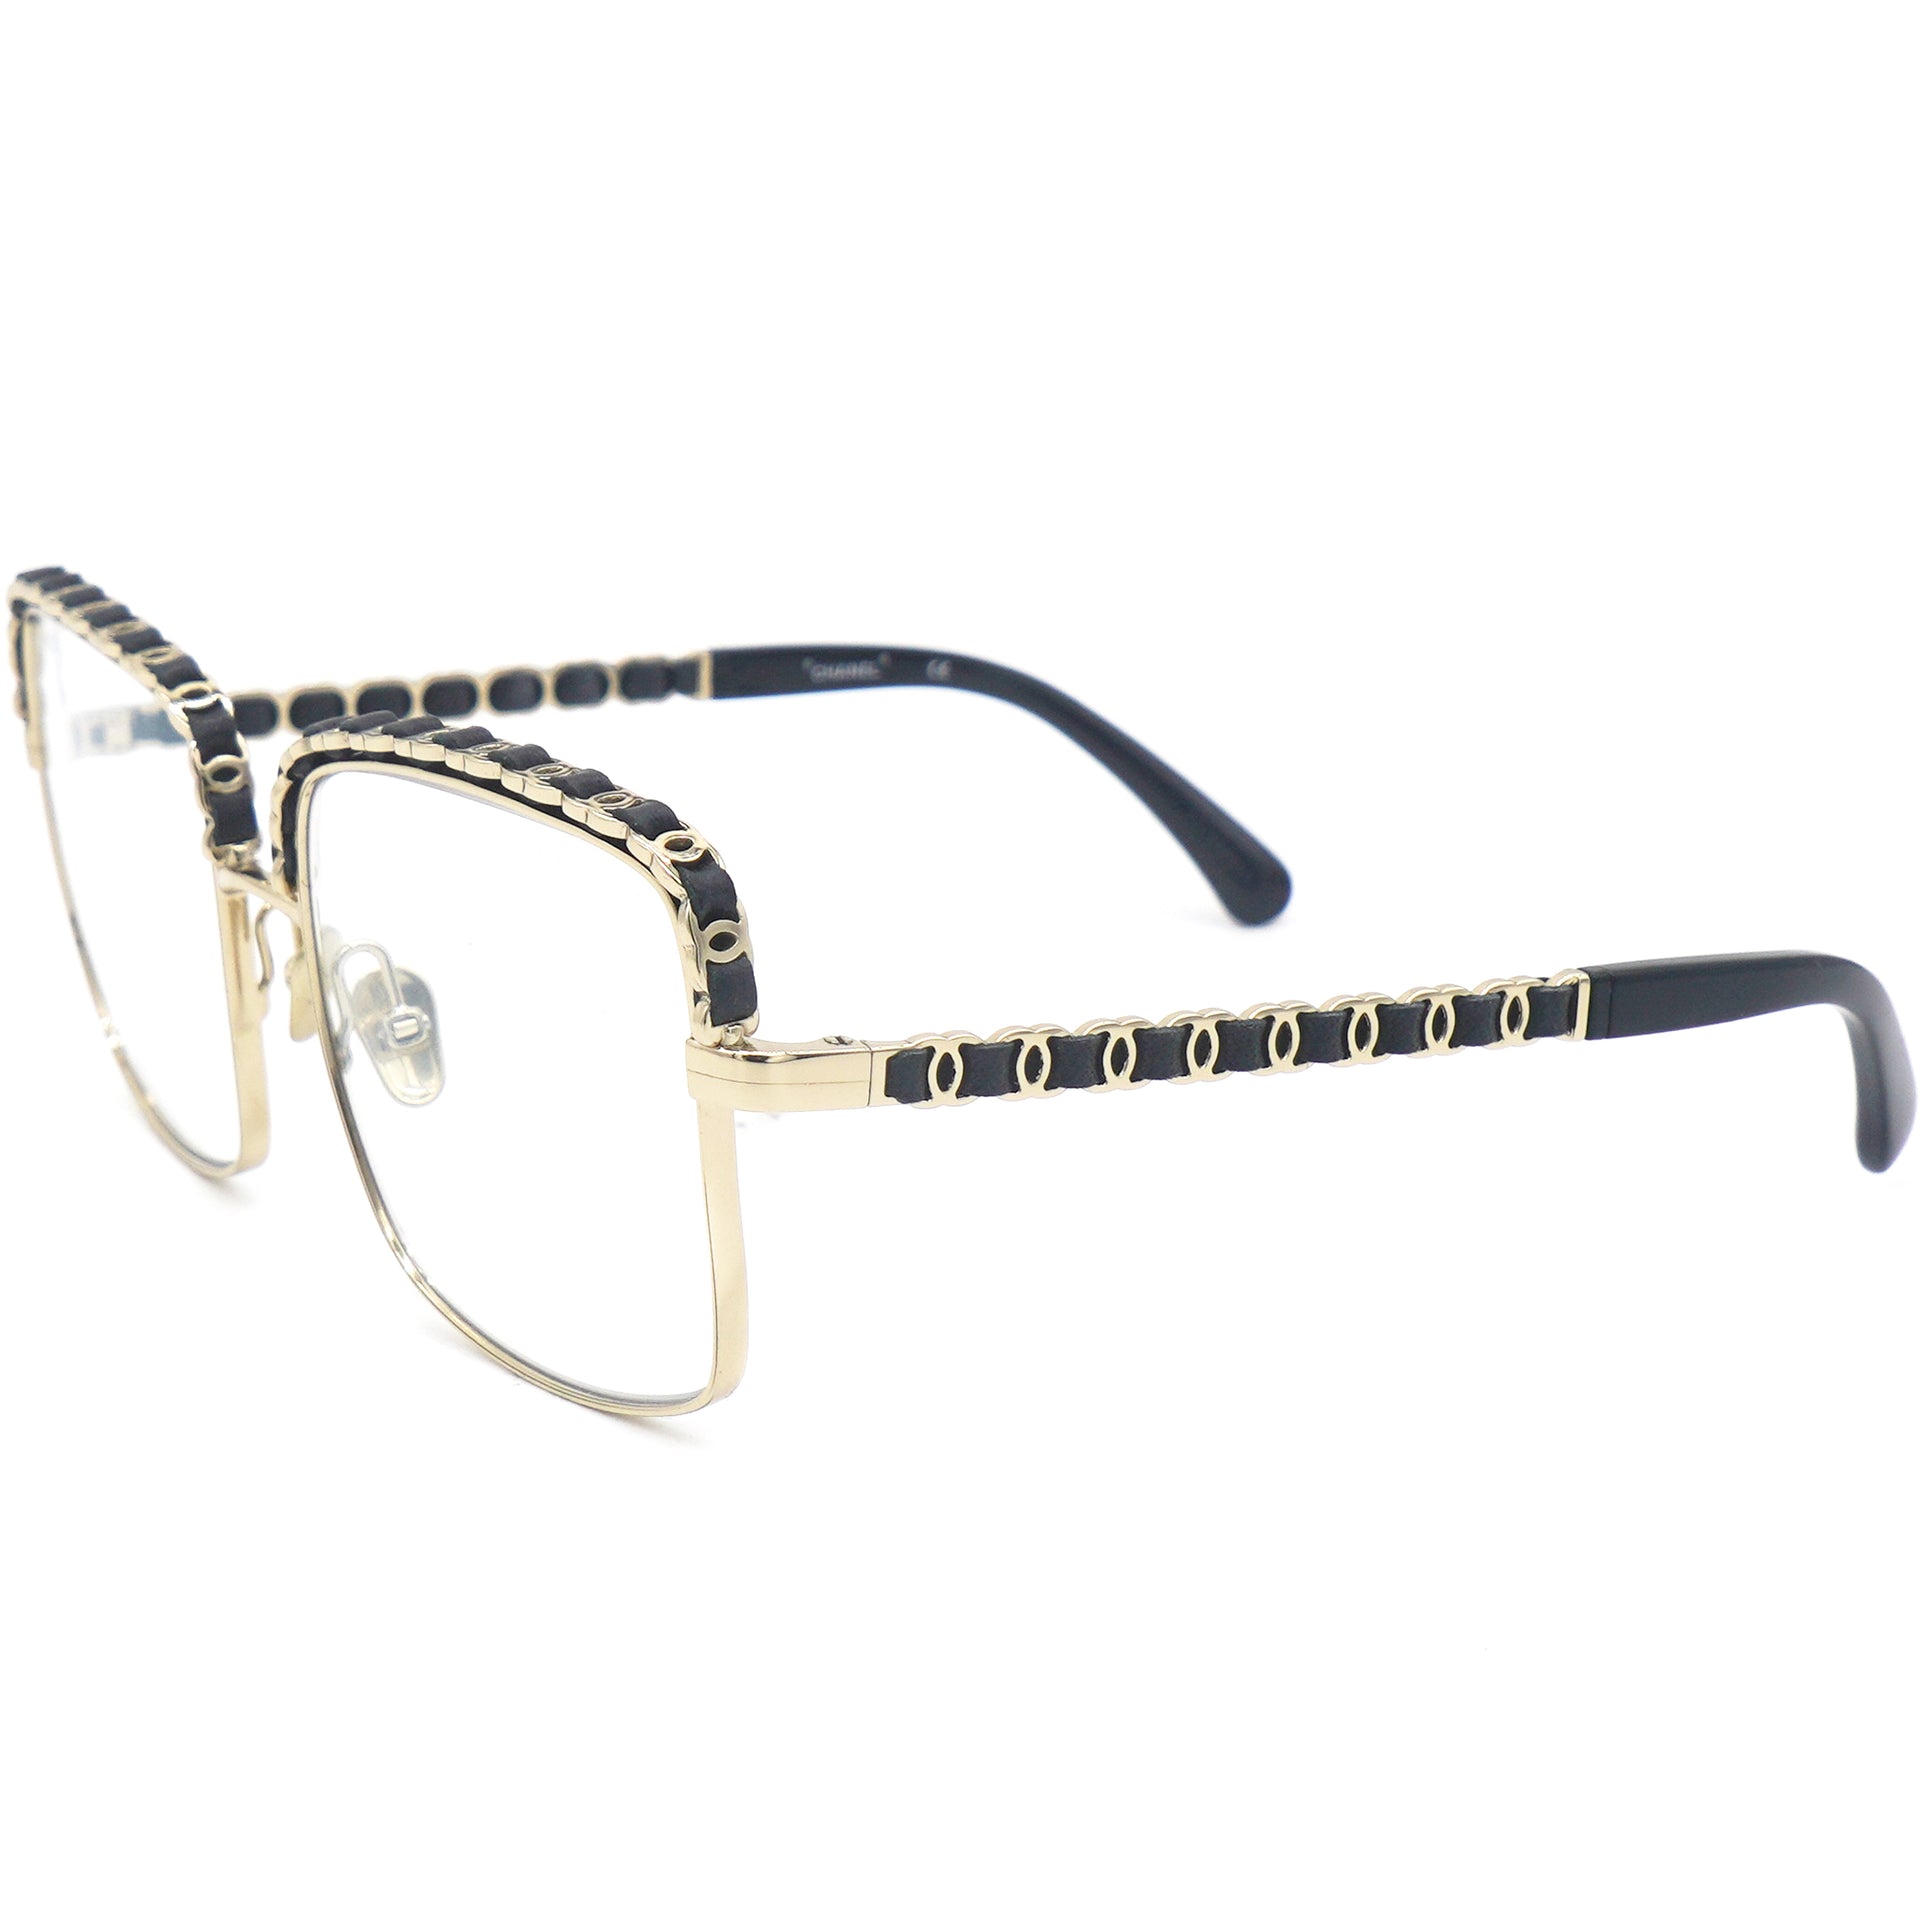 Chanel sunglasses with black textured square frame and black transparent  lenses